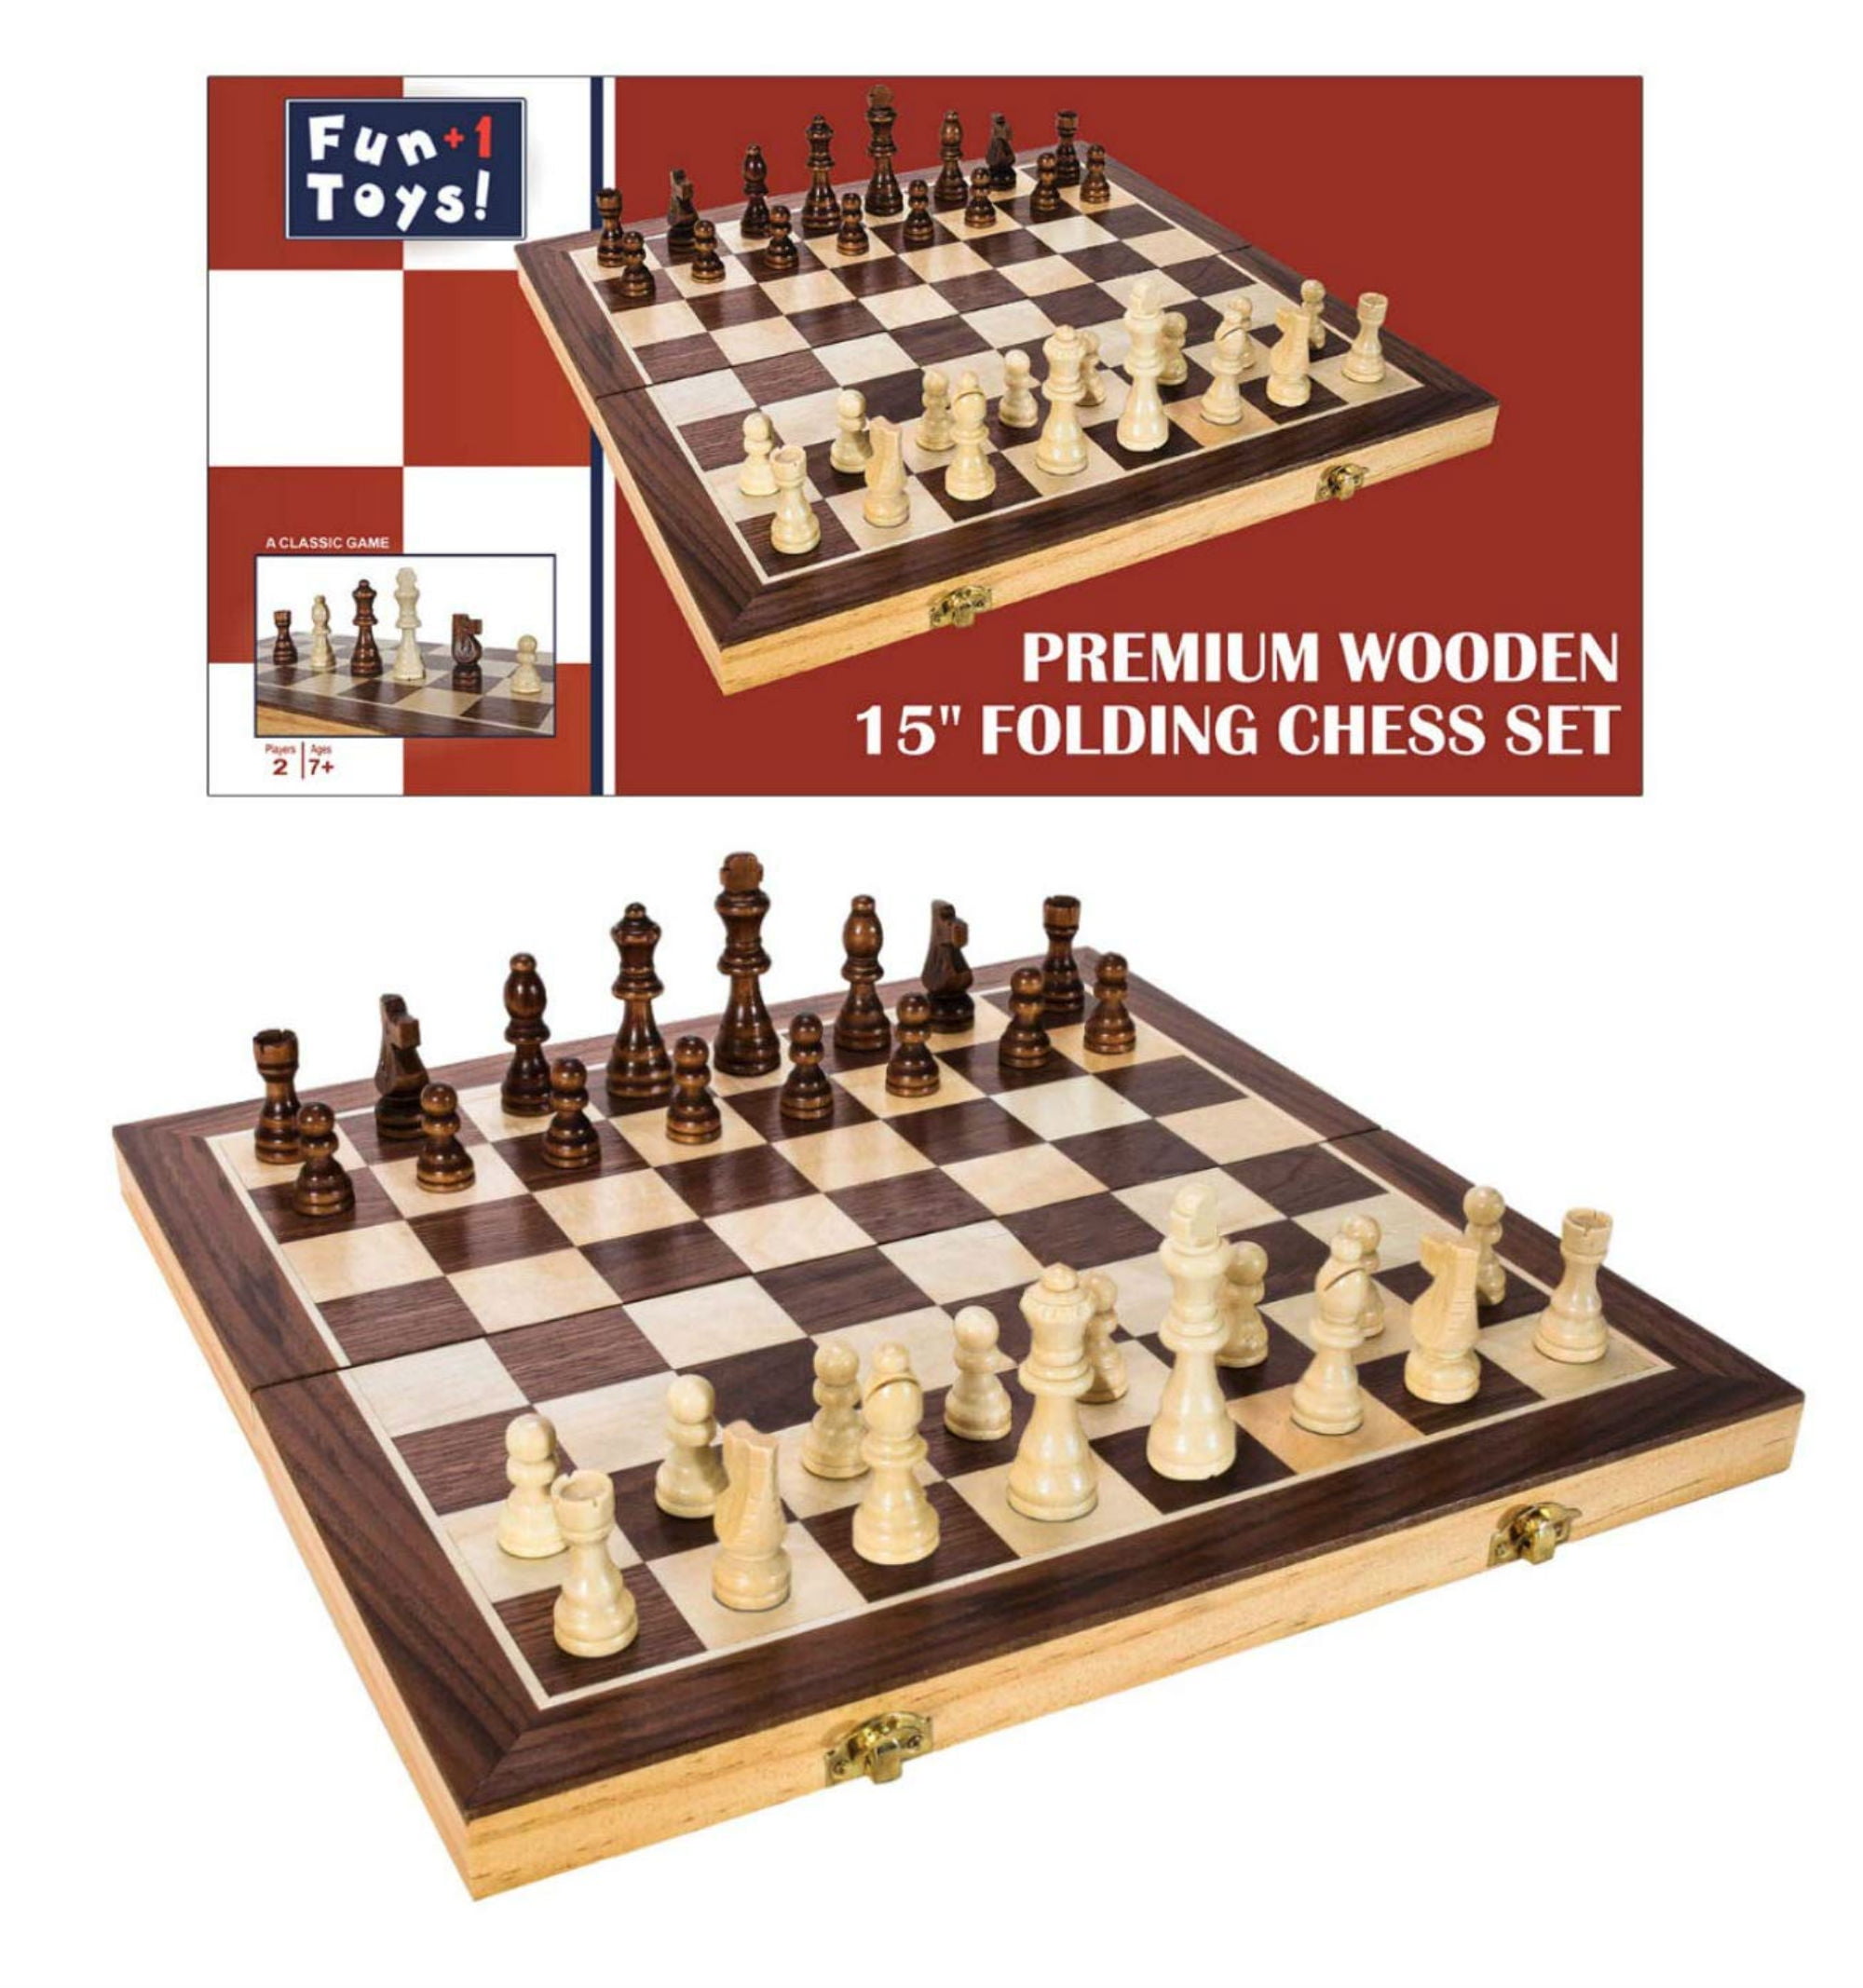 Wooden Chess Set Folding Classical Chess Set for Kids Adults with Instructions 